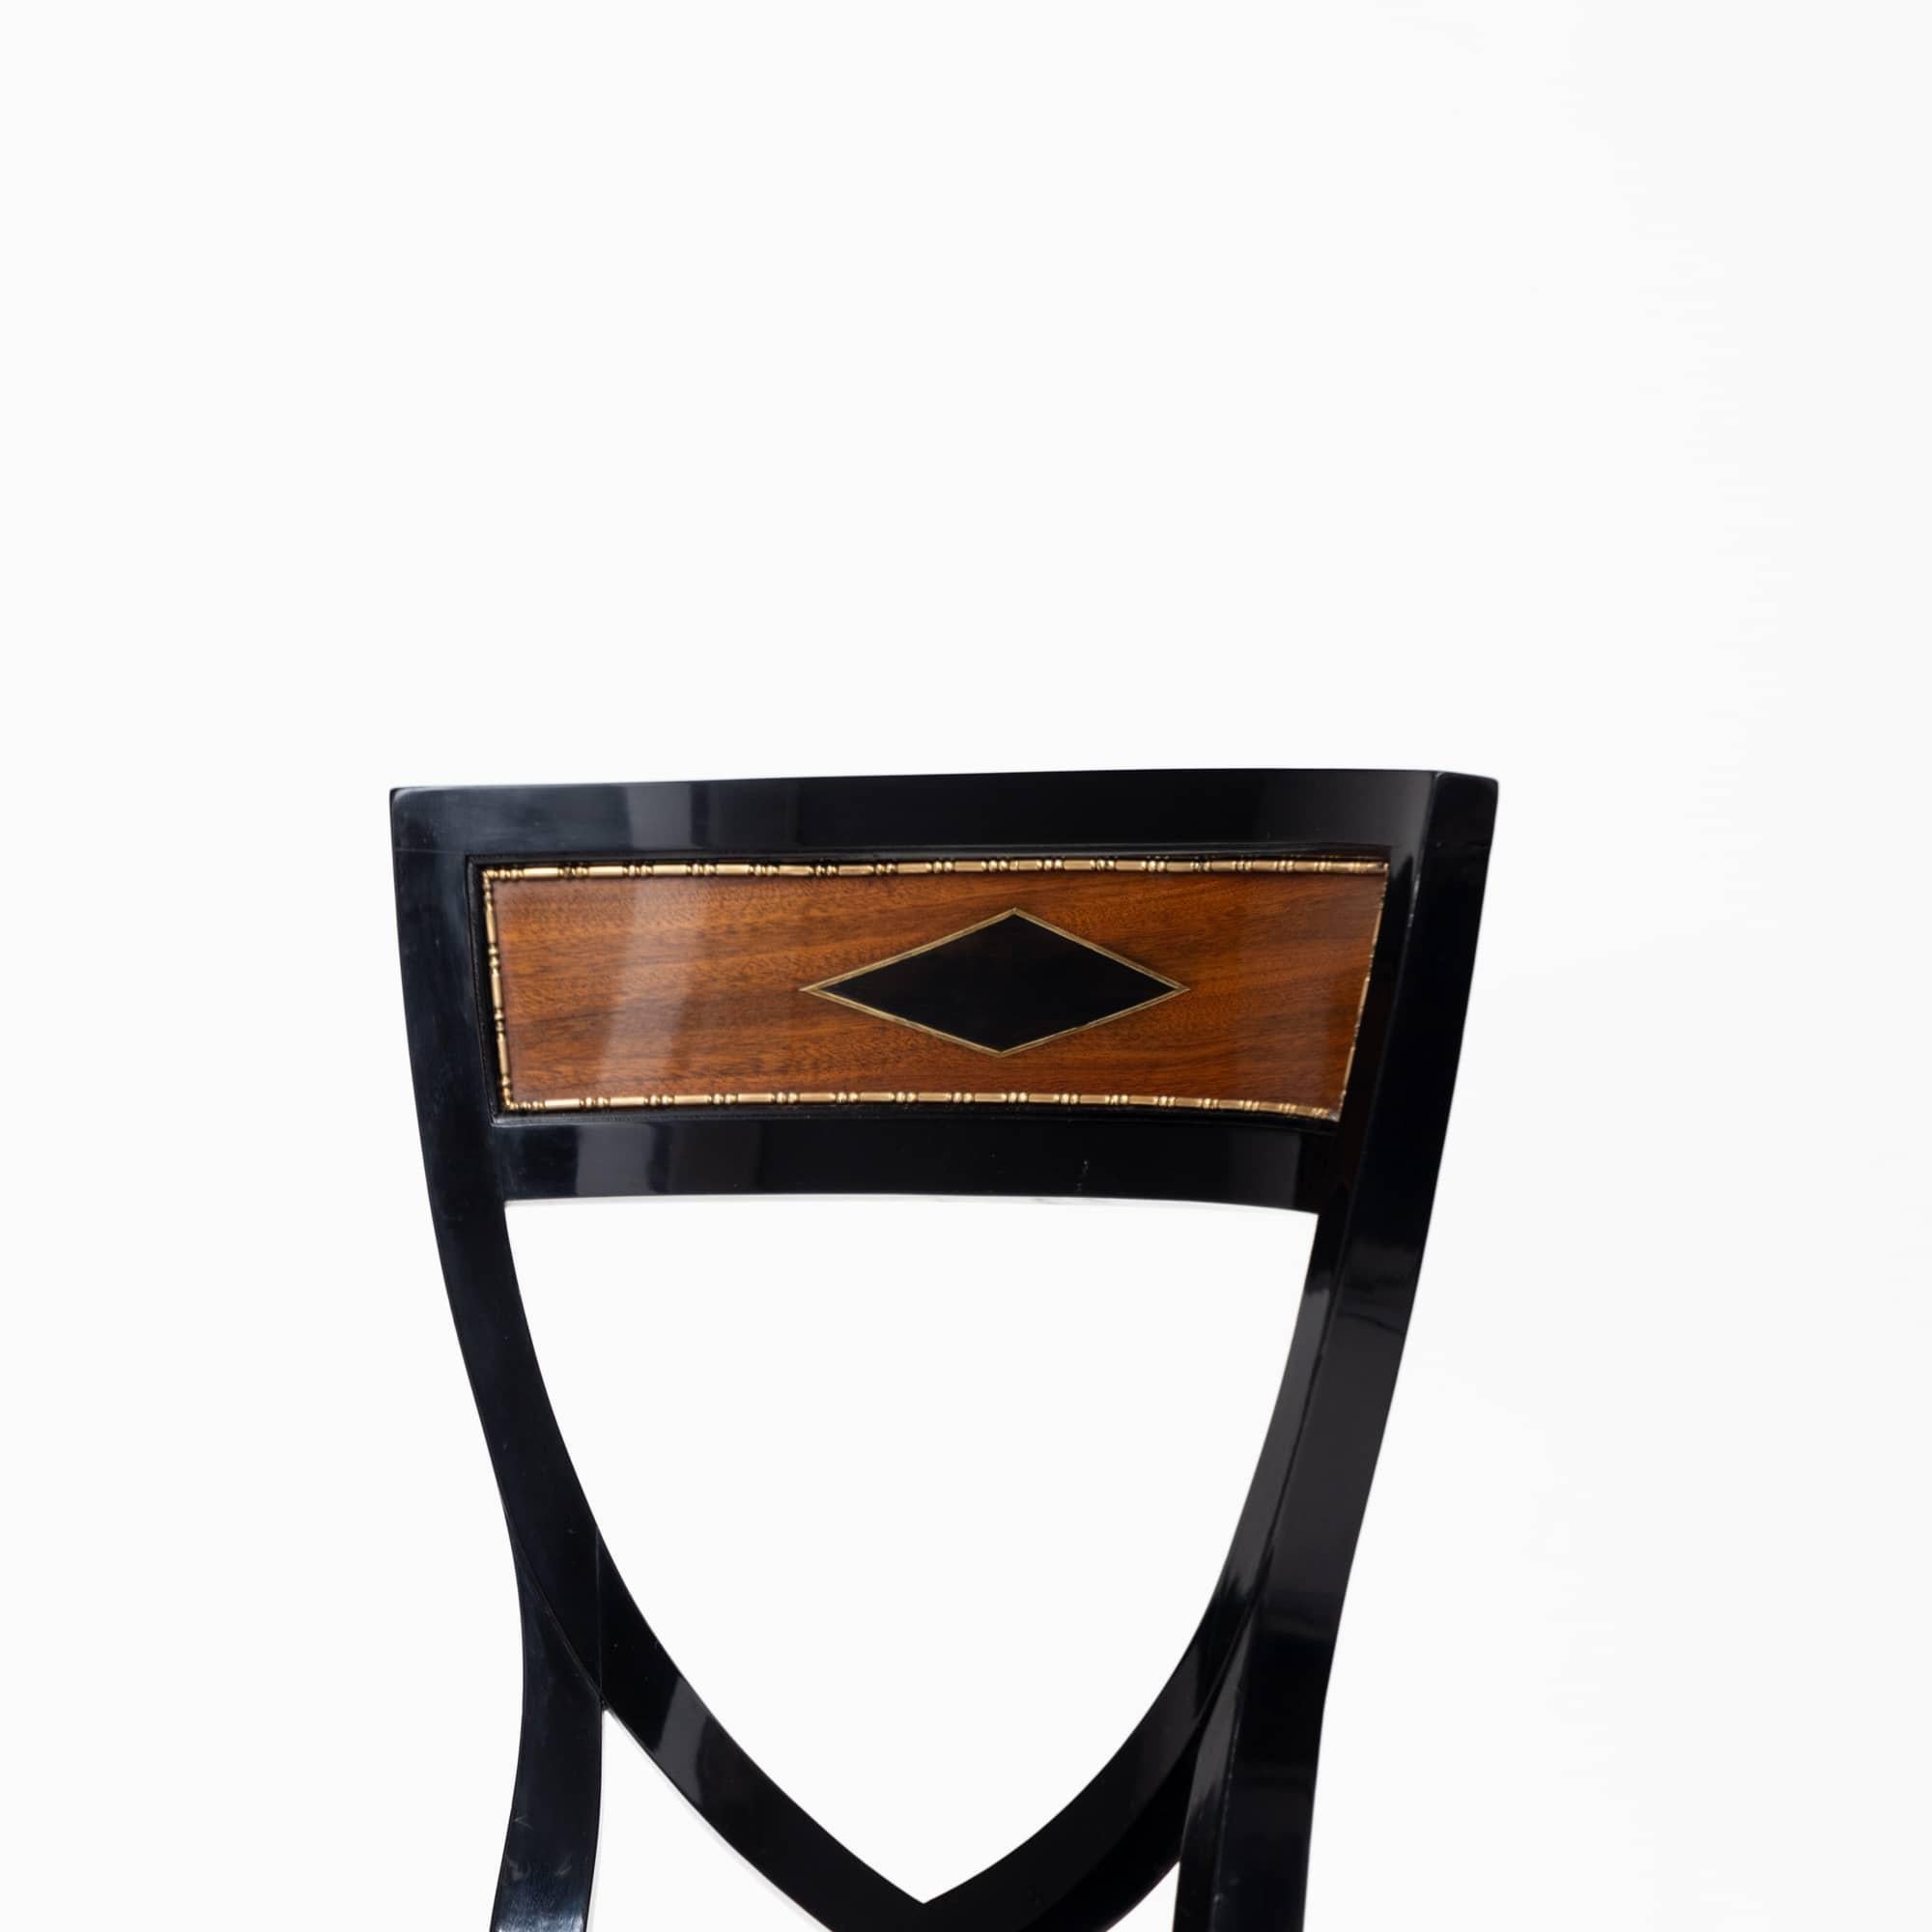 Side chair with a shield-shaped backrest and an ebonized frame boasting elegant sabre legs. The backrest is highlighted with brass profiles and veneered in rich walnut, adding a touch of sophistication. The seat has been newly upholstered and